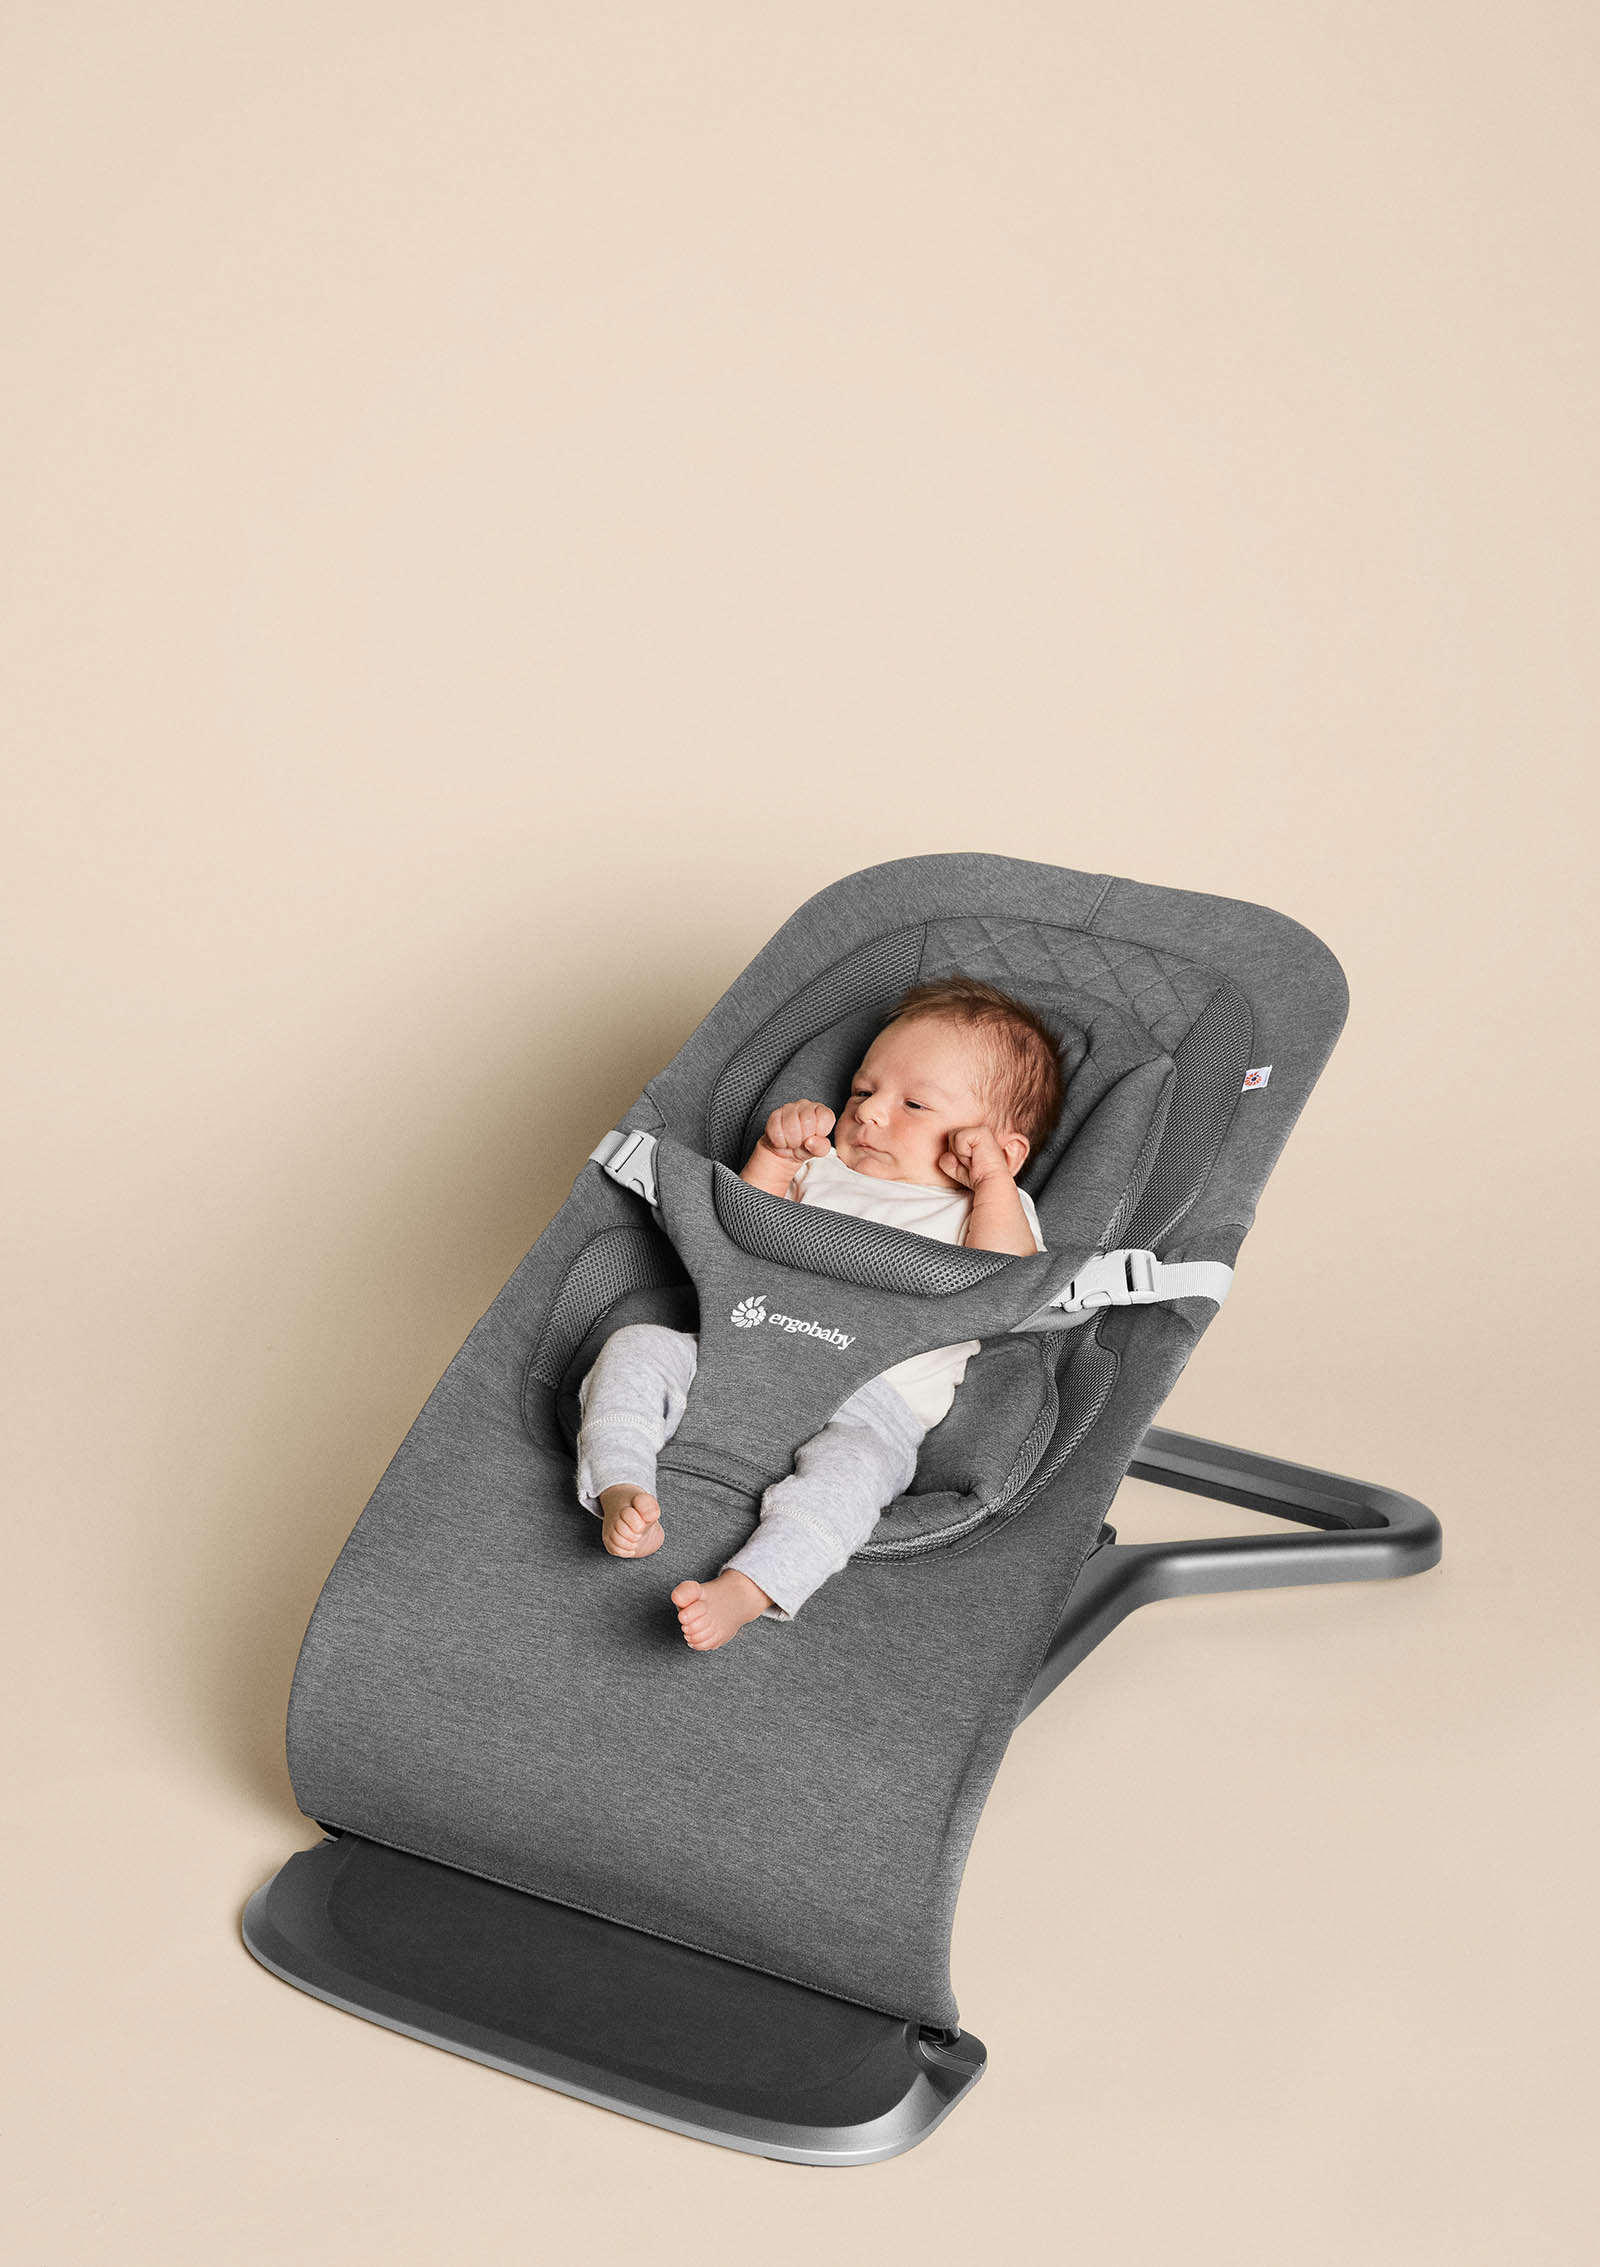 'Evolve' 3-in-1 Babywippe charcoal grey